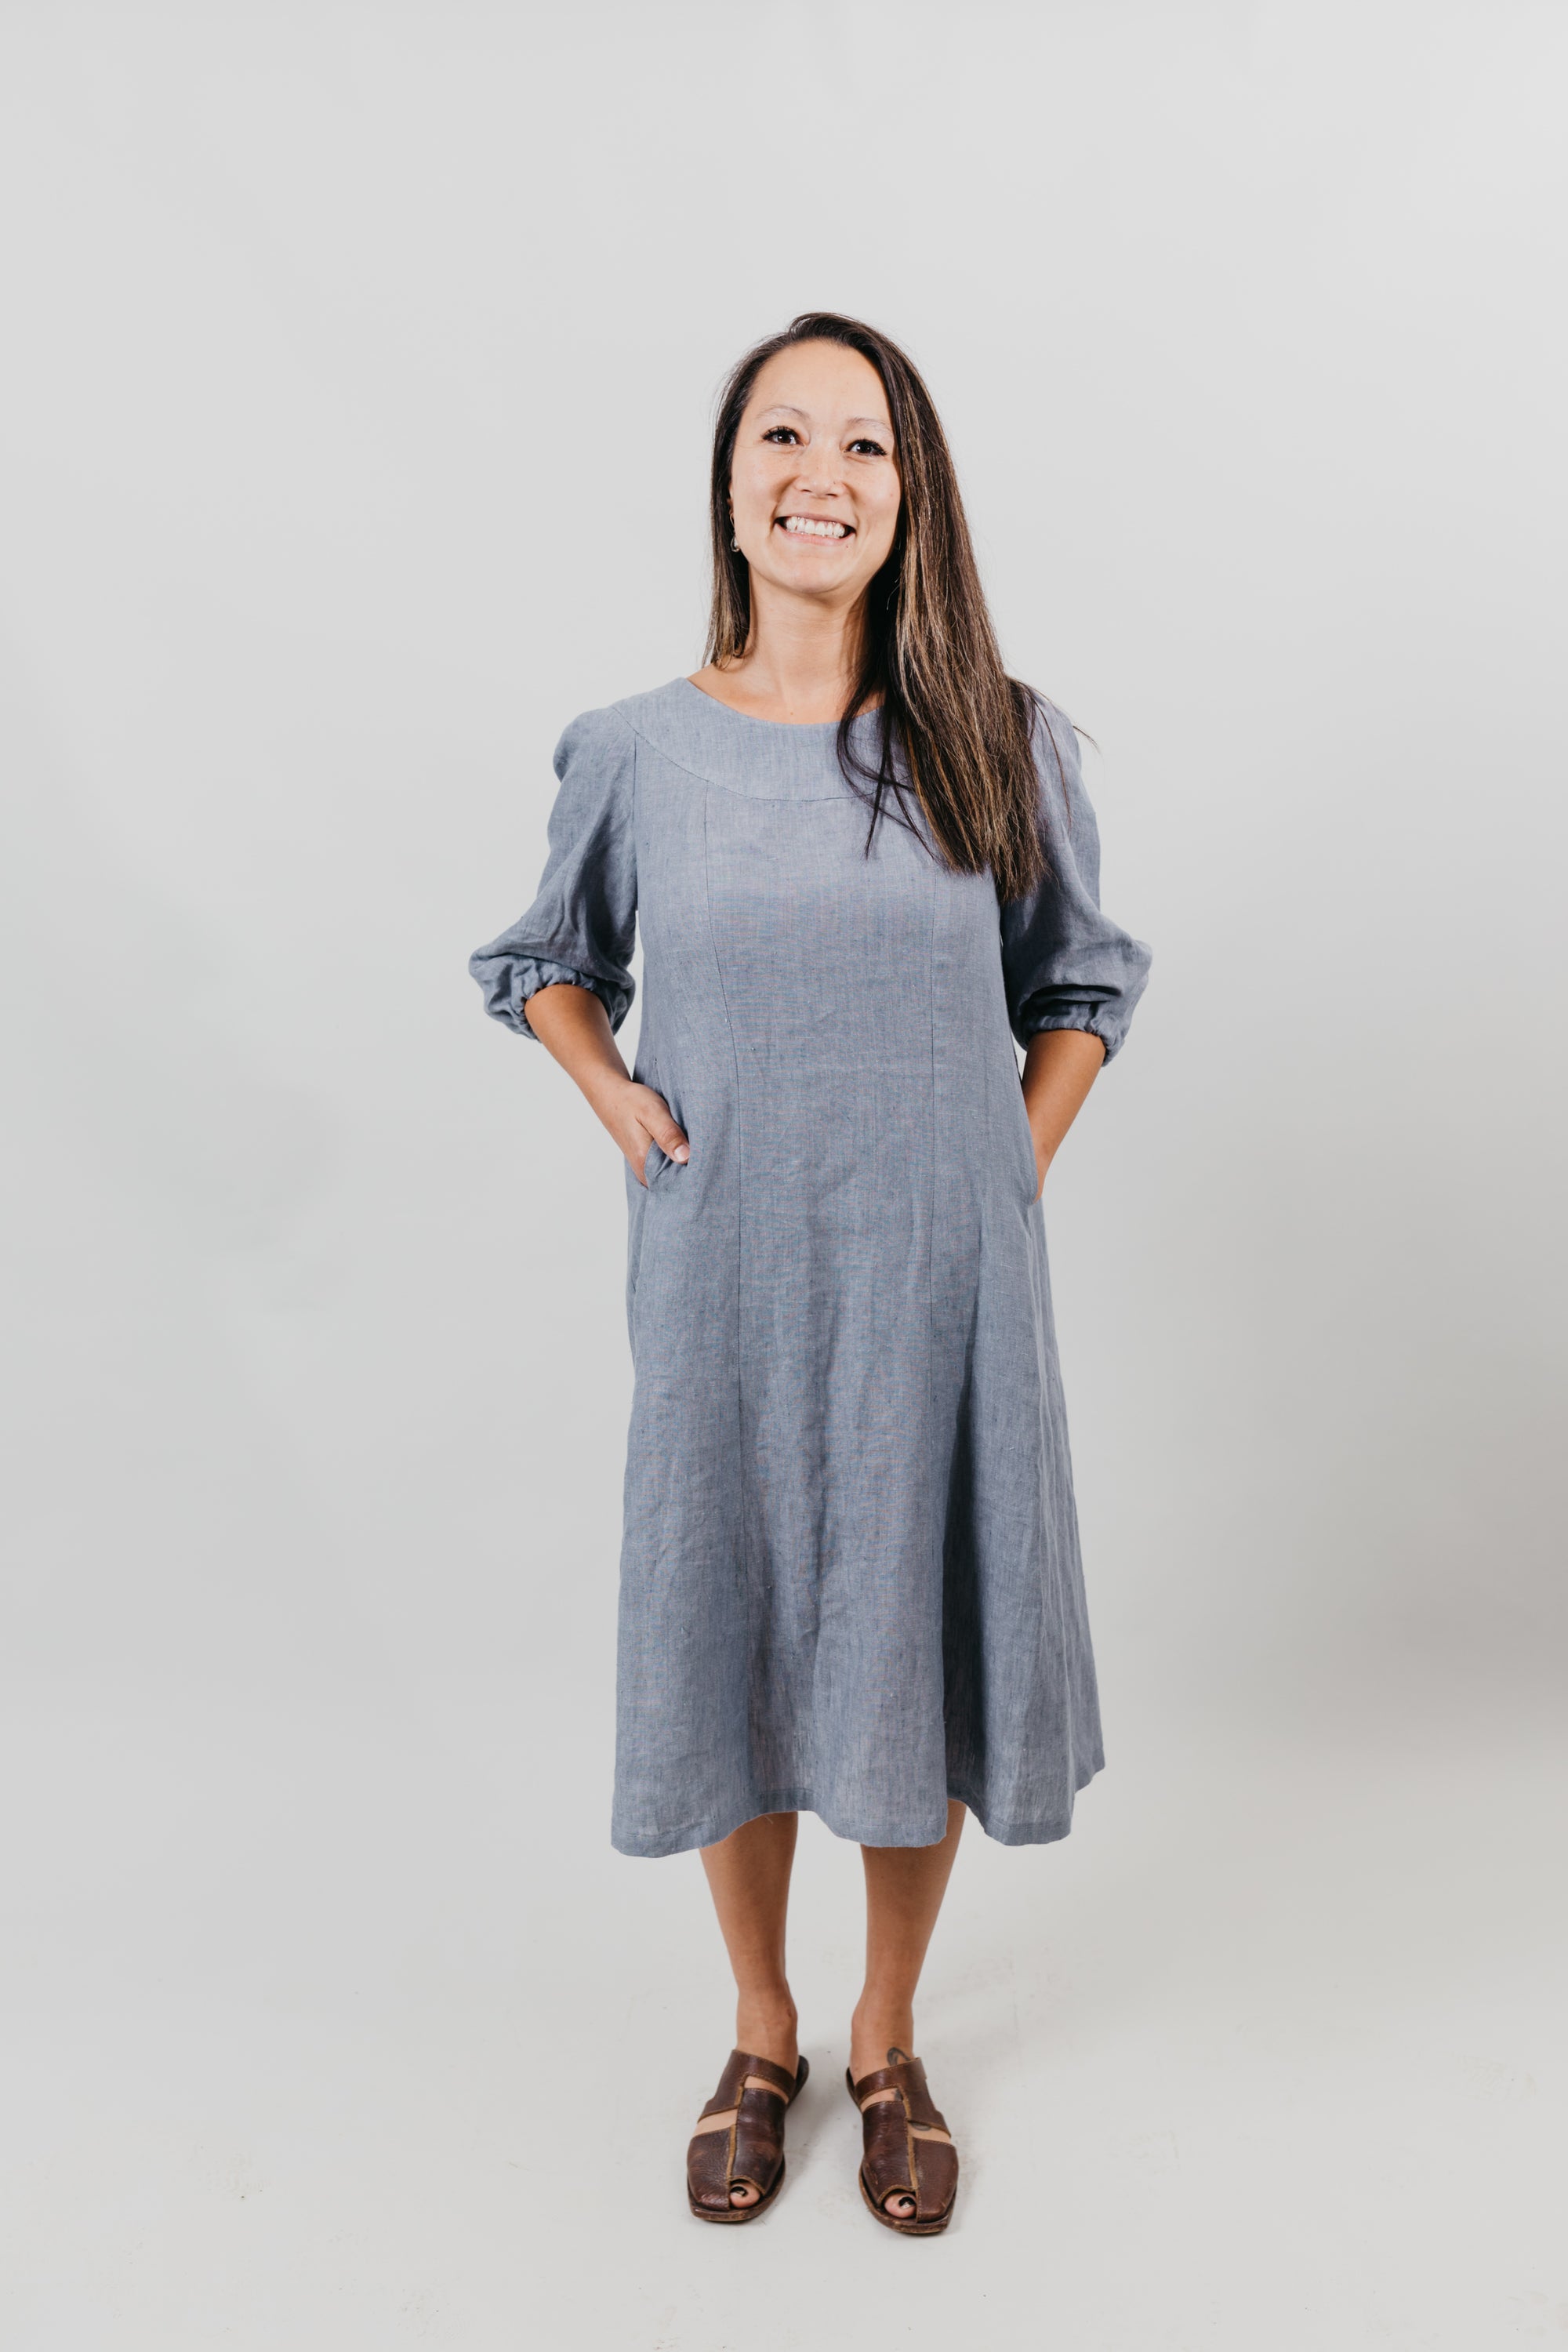 Grey linen muumuu on an Asian American woman standing in front of a white backdrop.